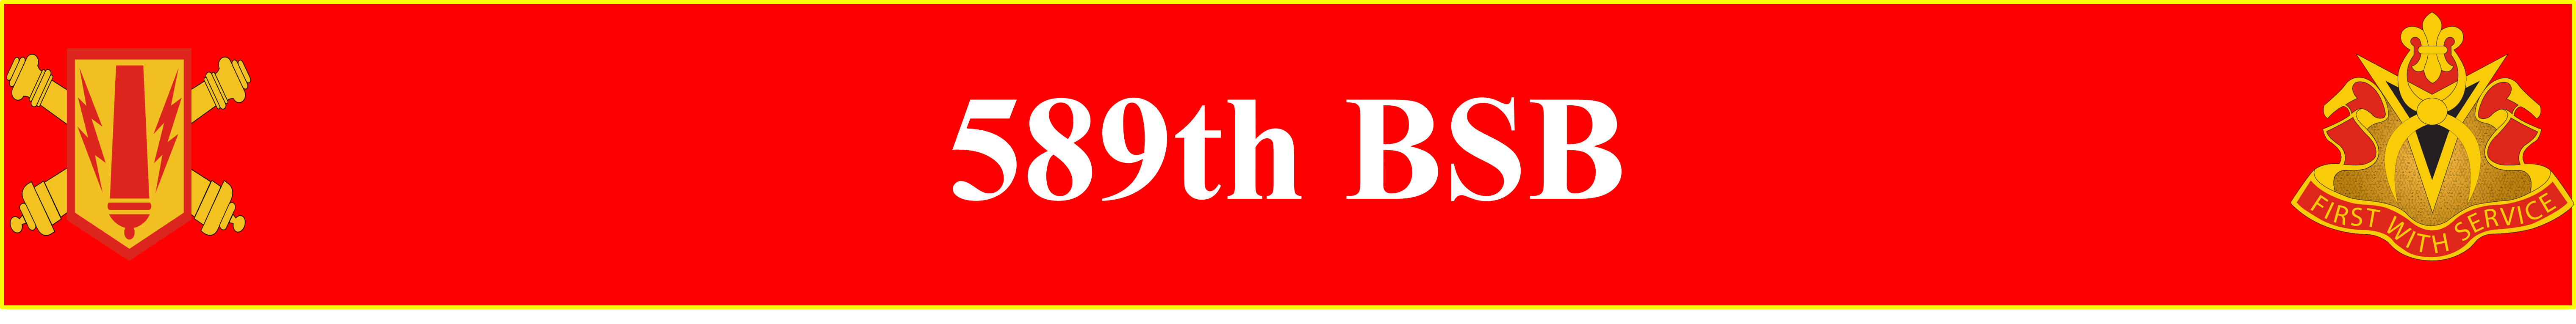 589th BSB